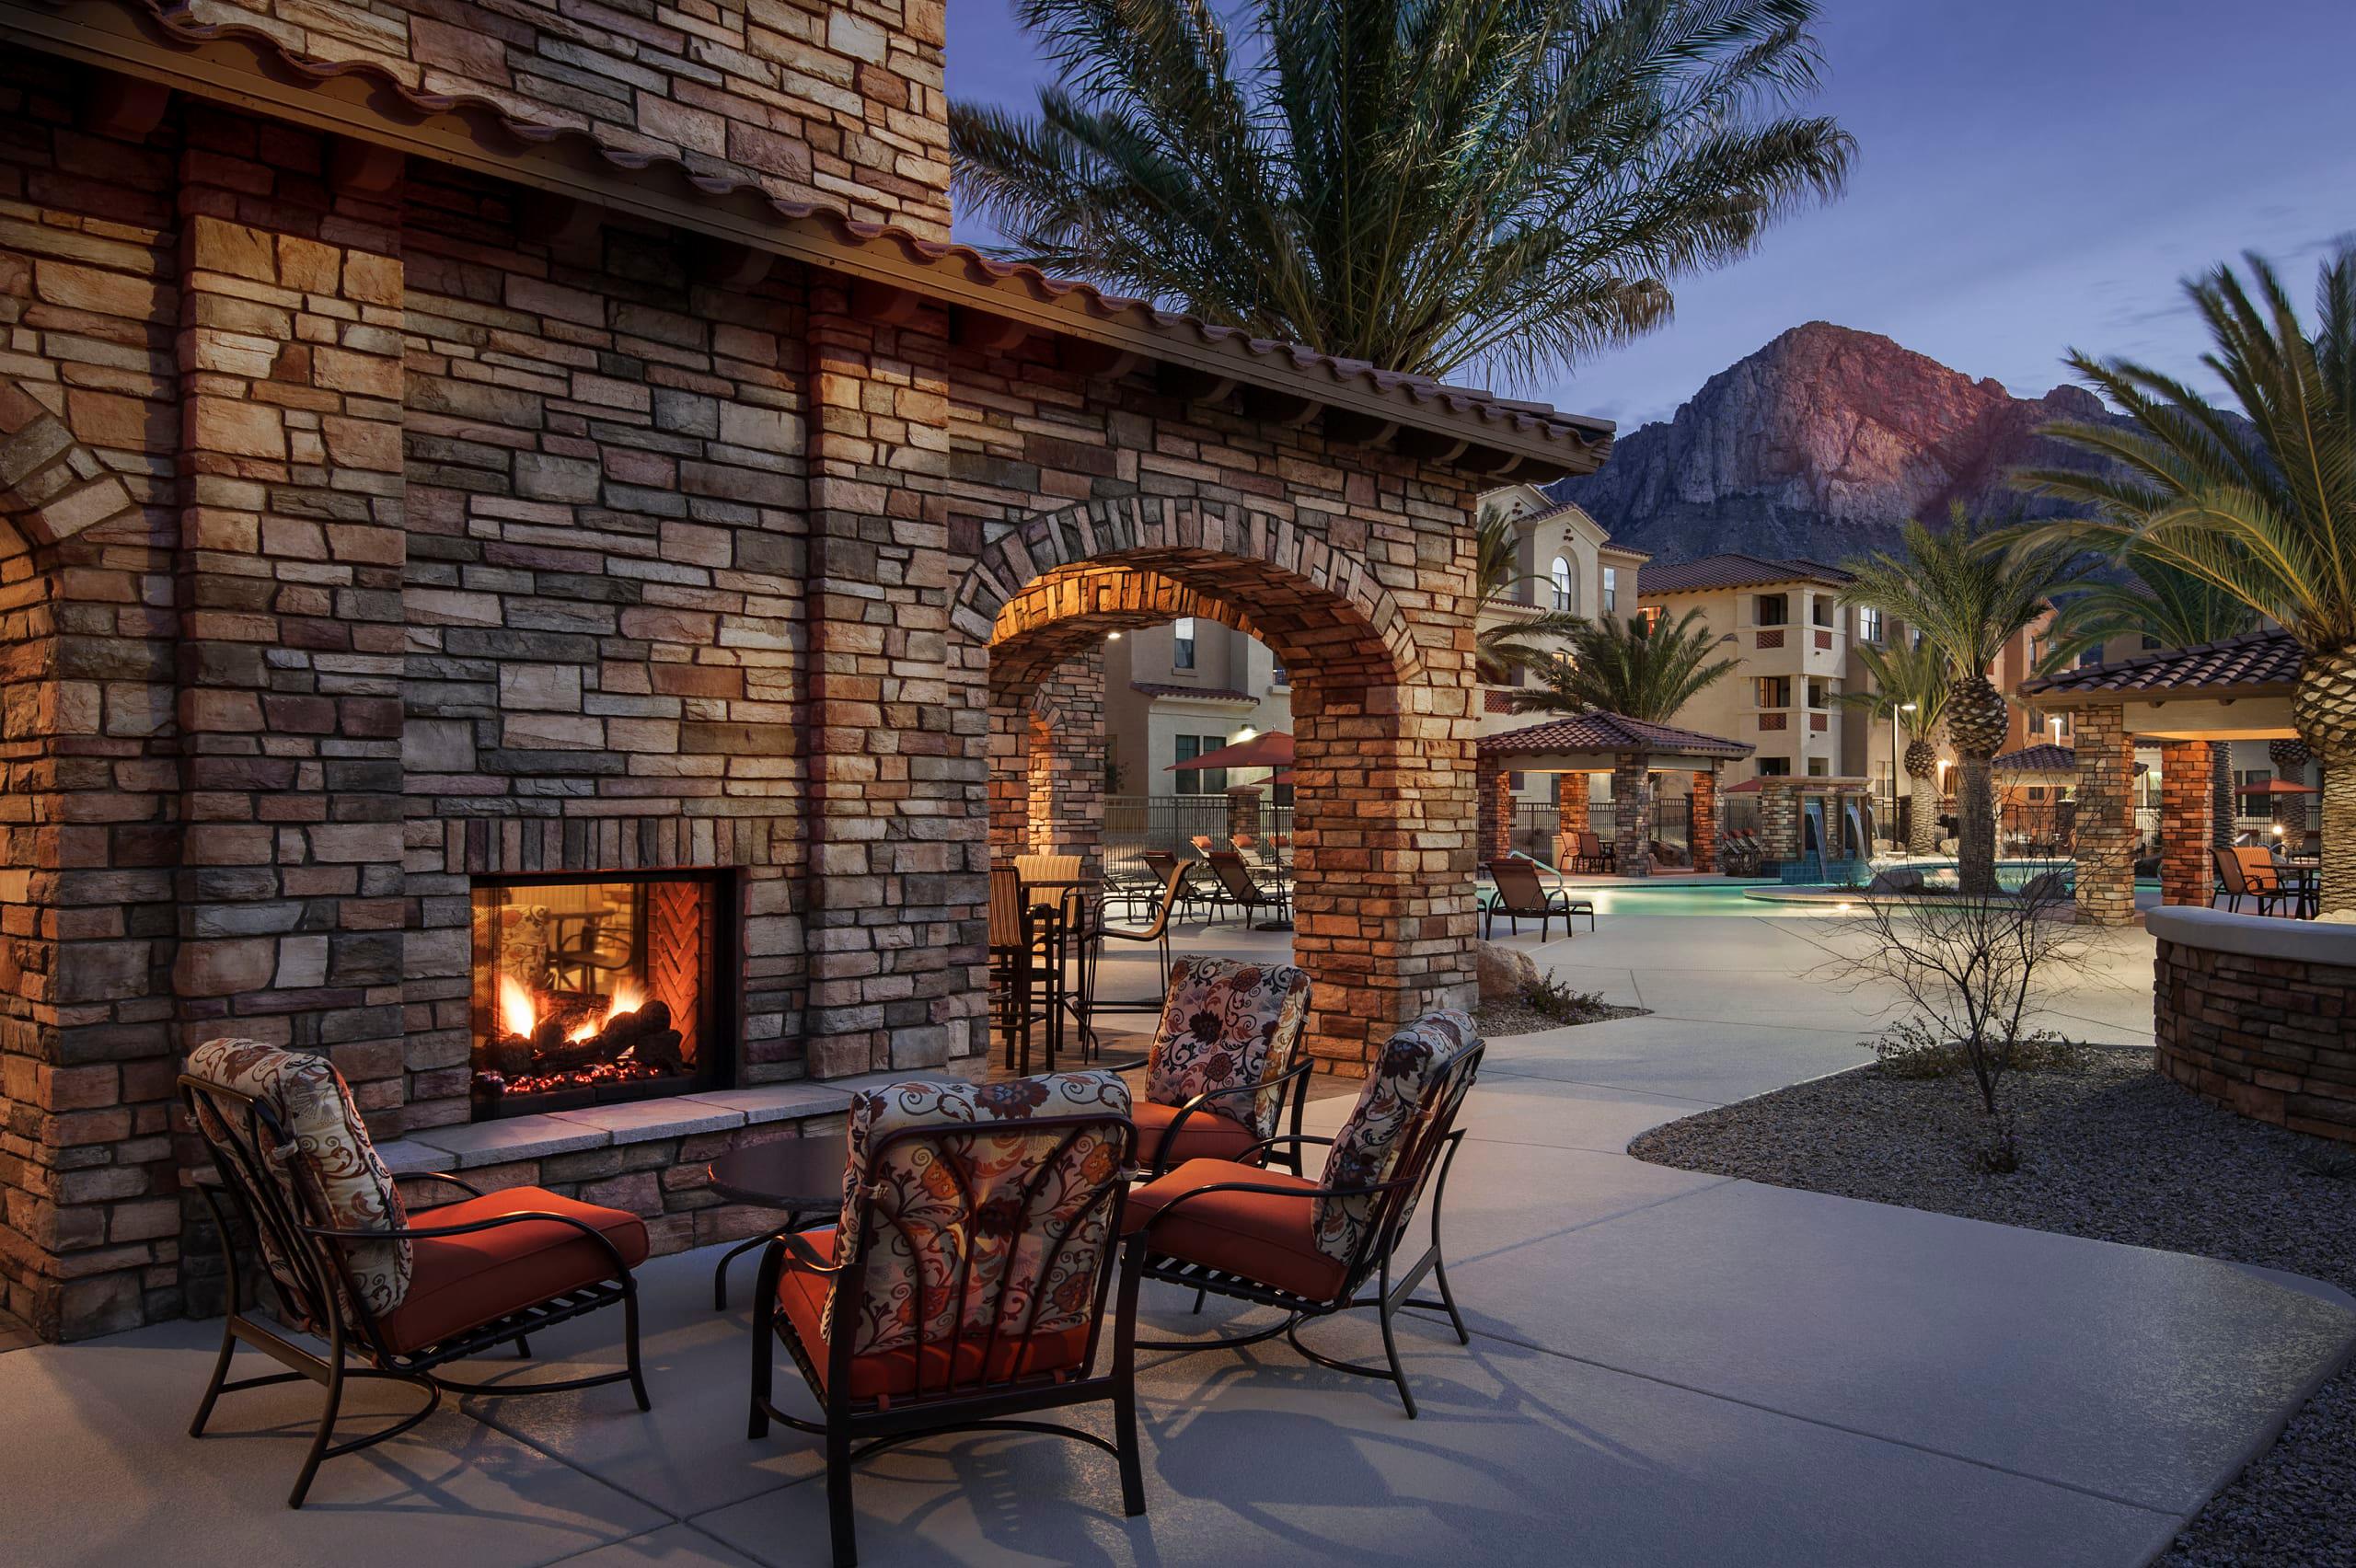 Enjoy poolside fireplaces and flat-screen TVs